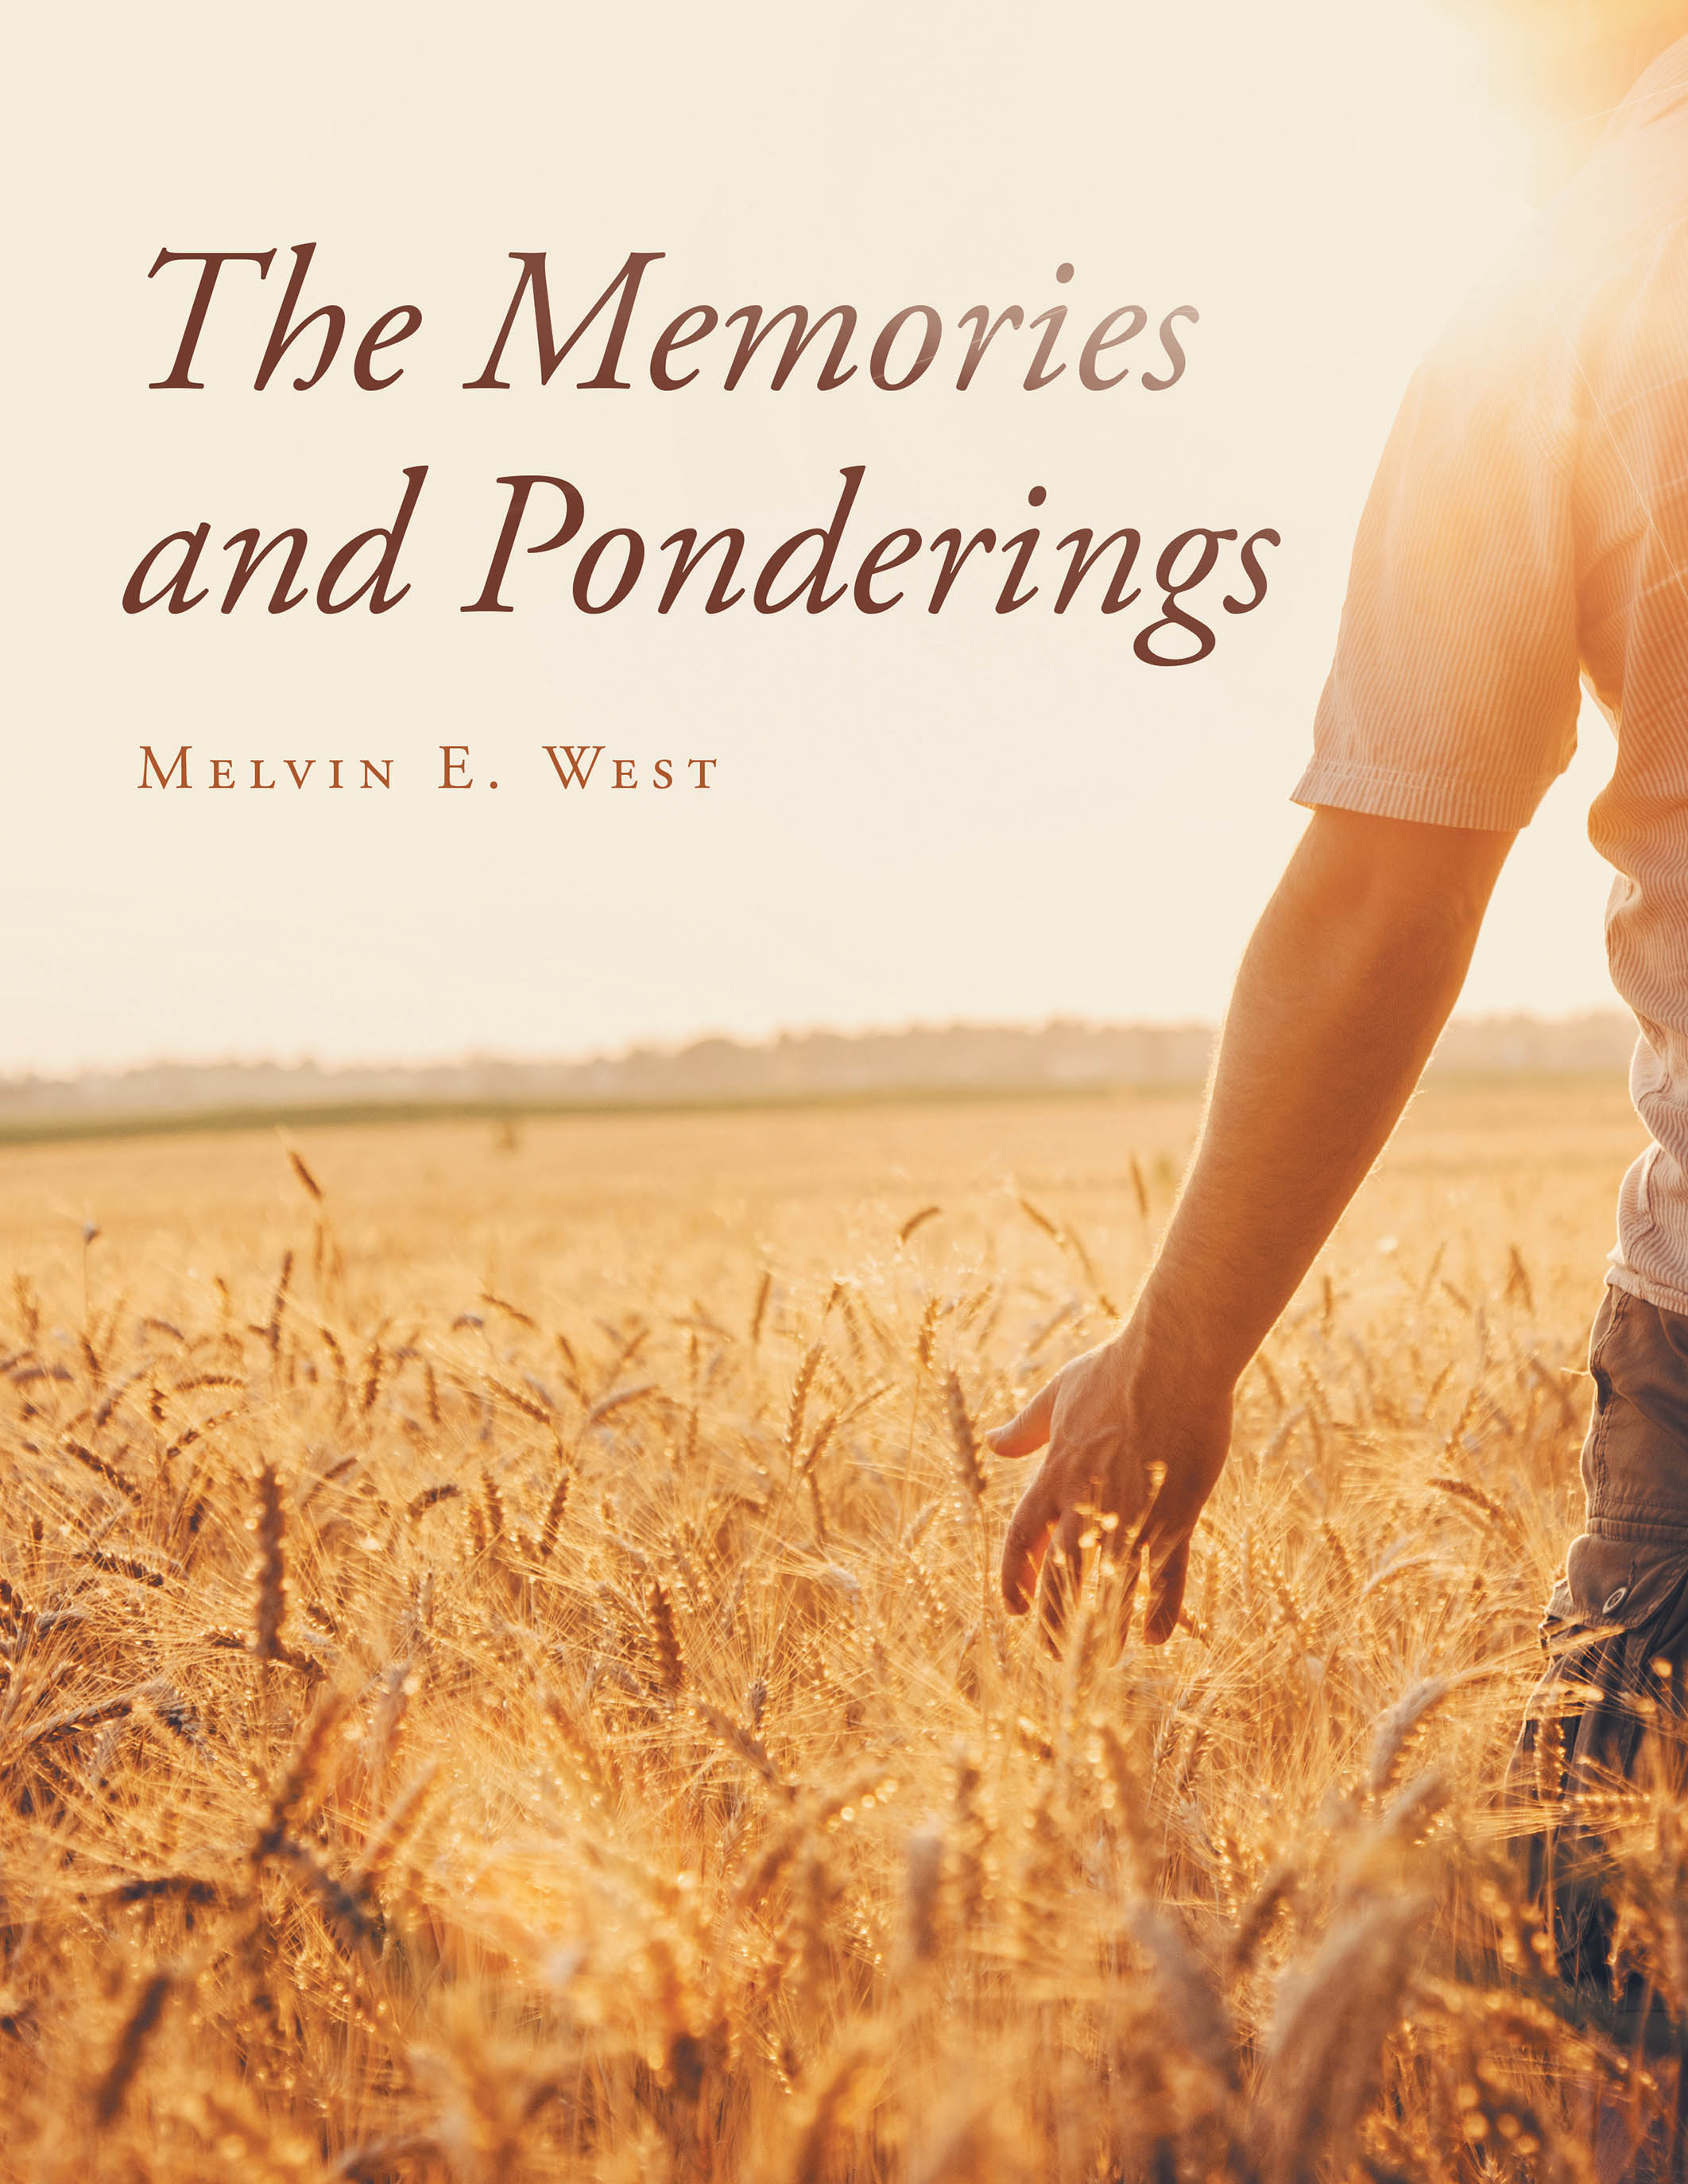 Melvin E. West’s Newly Released “The Memories and Ponderings” is a Heartwarming Collection of Reflections